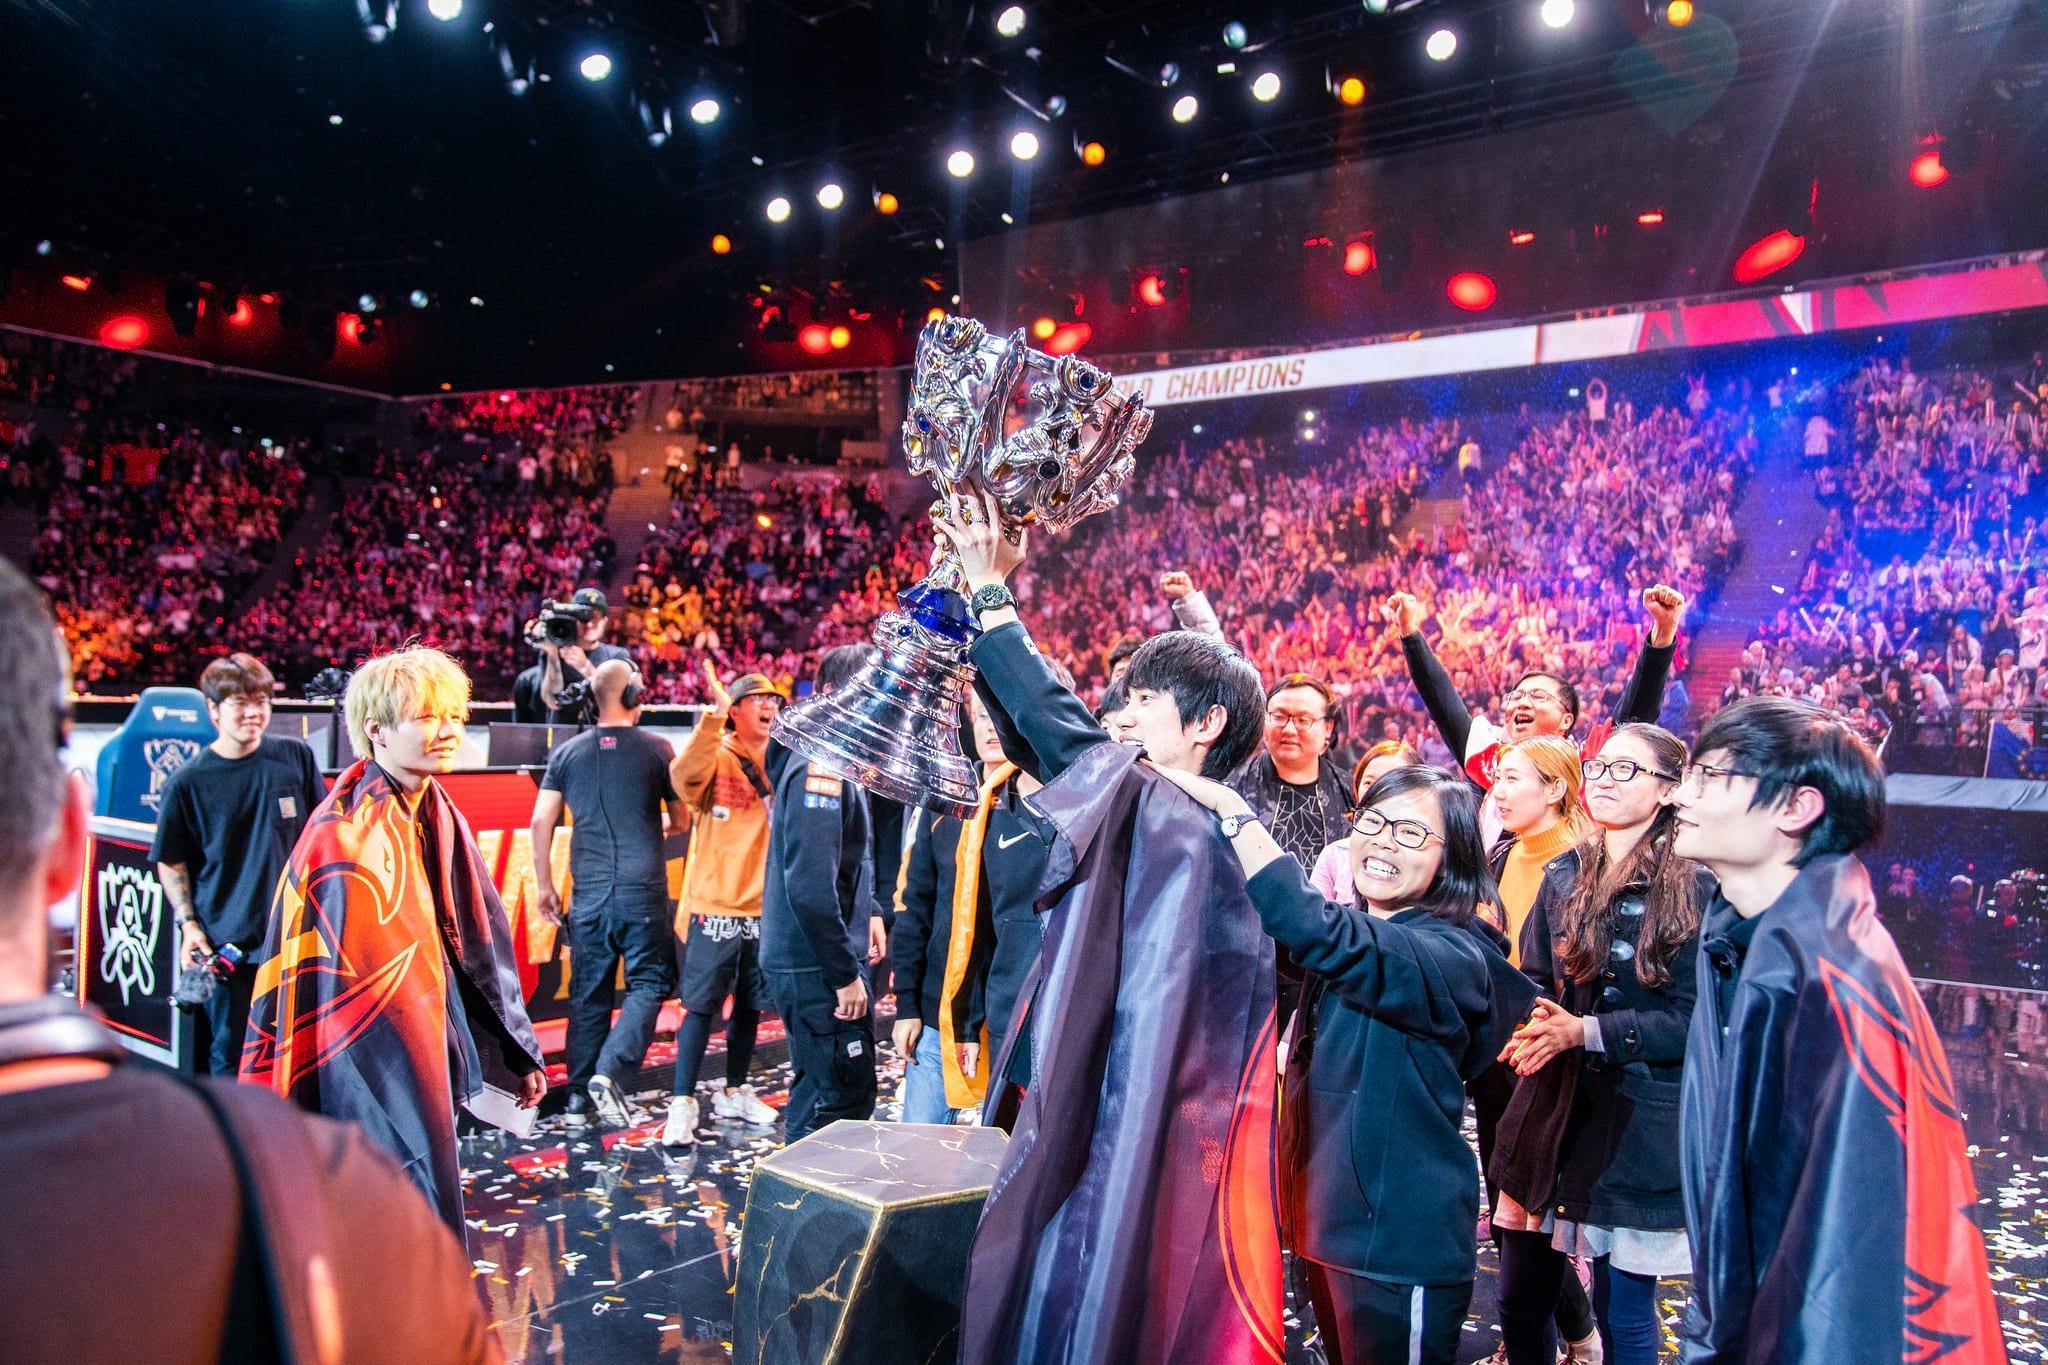 FPX knocked out of League of Legends Worlds 2021 after 0-4 loss in